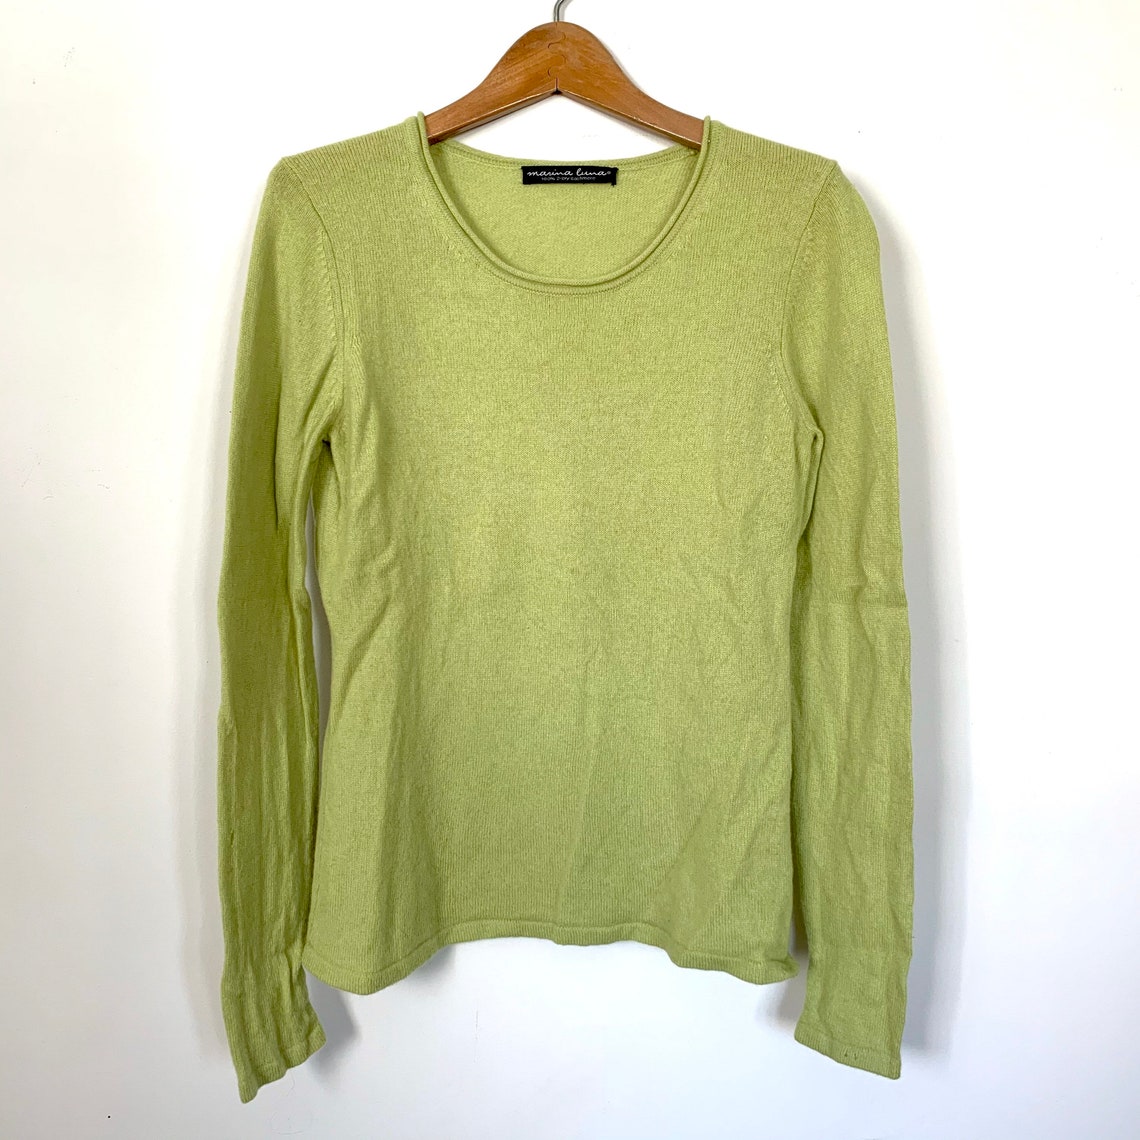 Vintage 90s Cashmere Sweater in Lime Green, Scoop Neck, Size Medium - Etsy